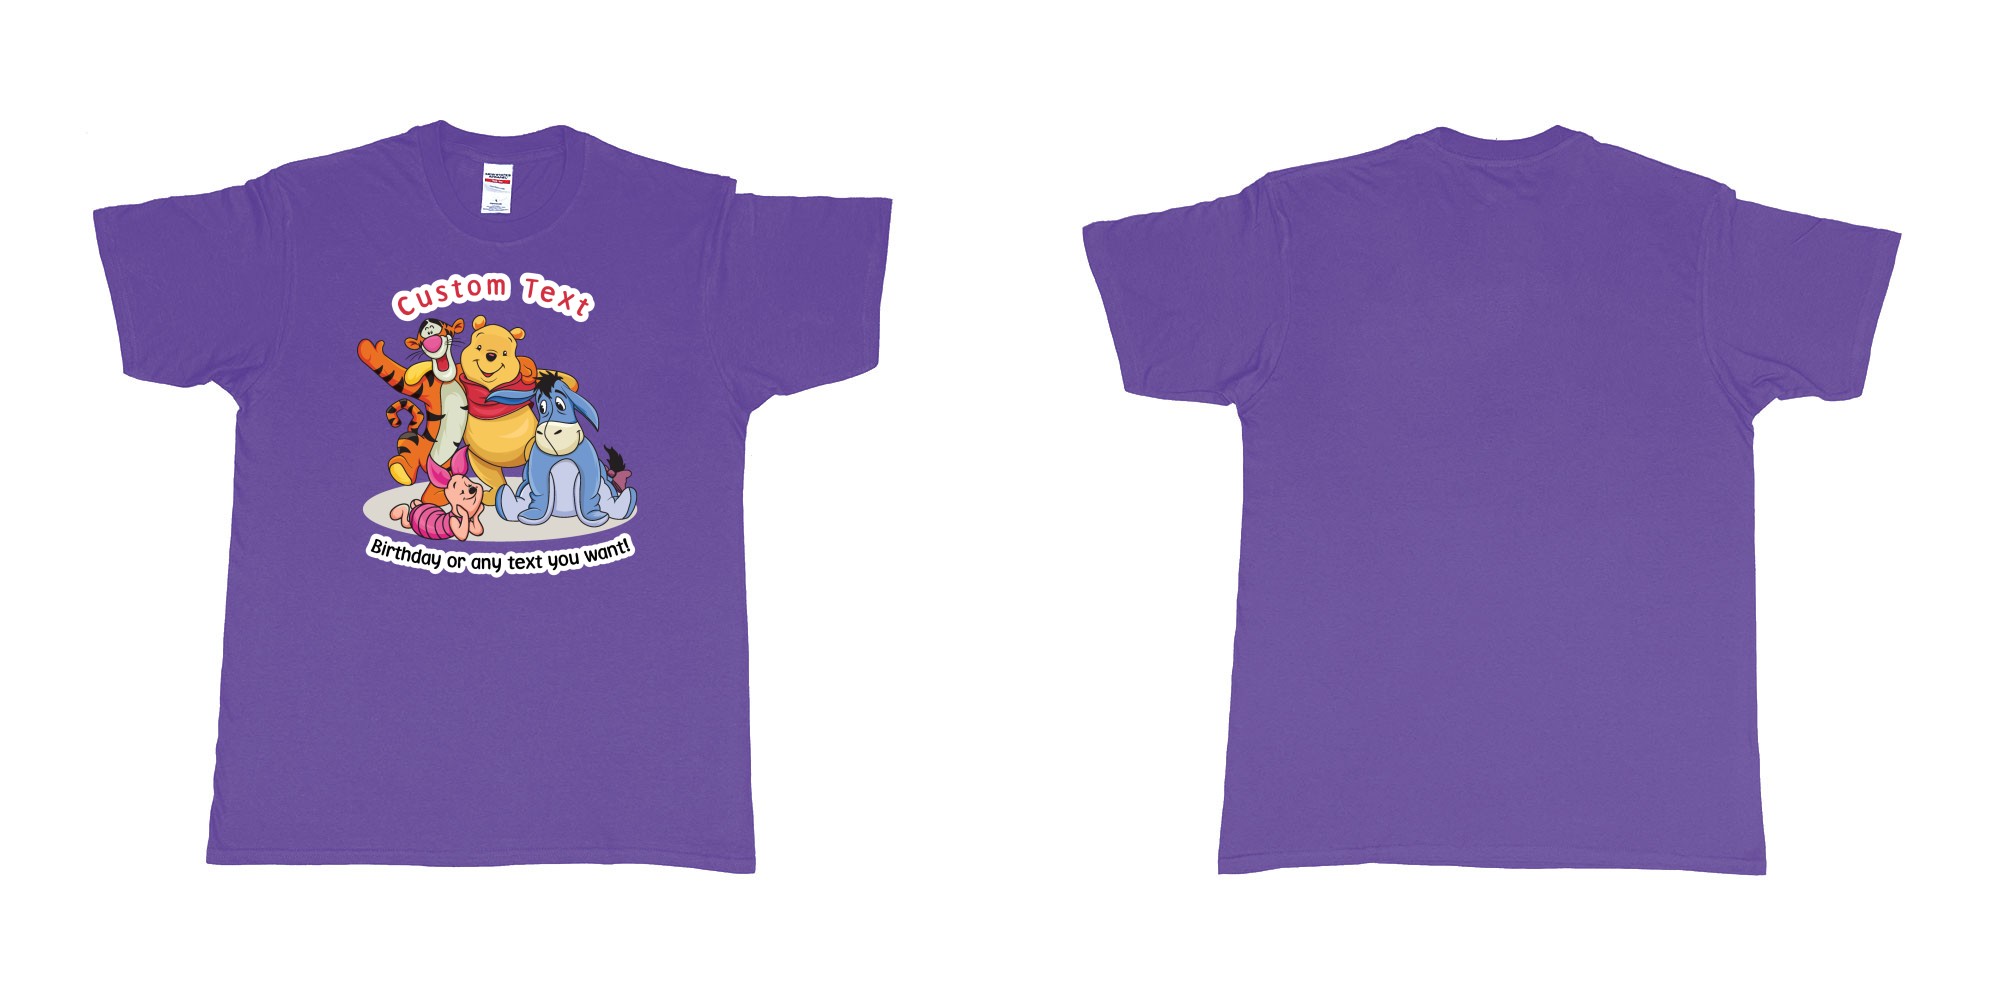 Custom tshirt design winnie the pooh and friend in fabric color purple choice your own text made in Bali by The Pirate Way